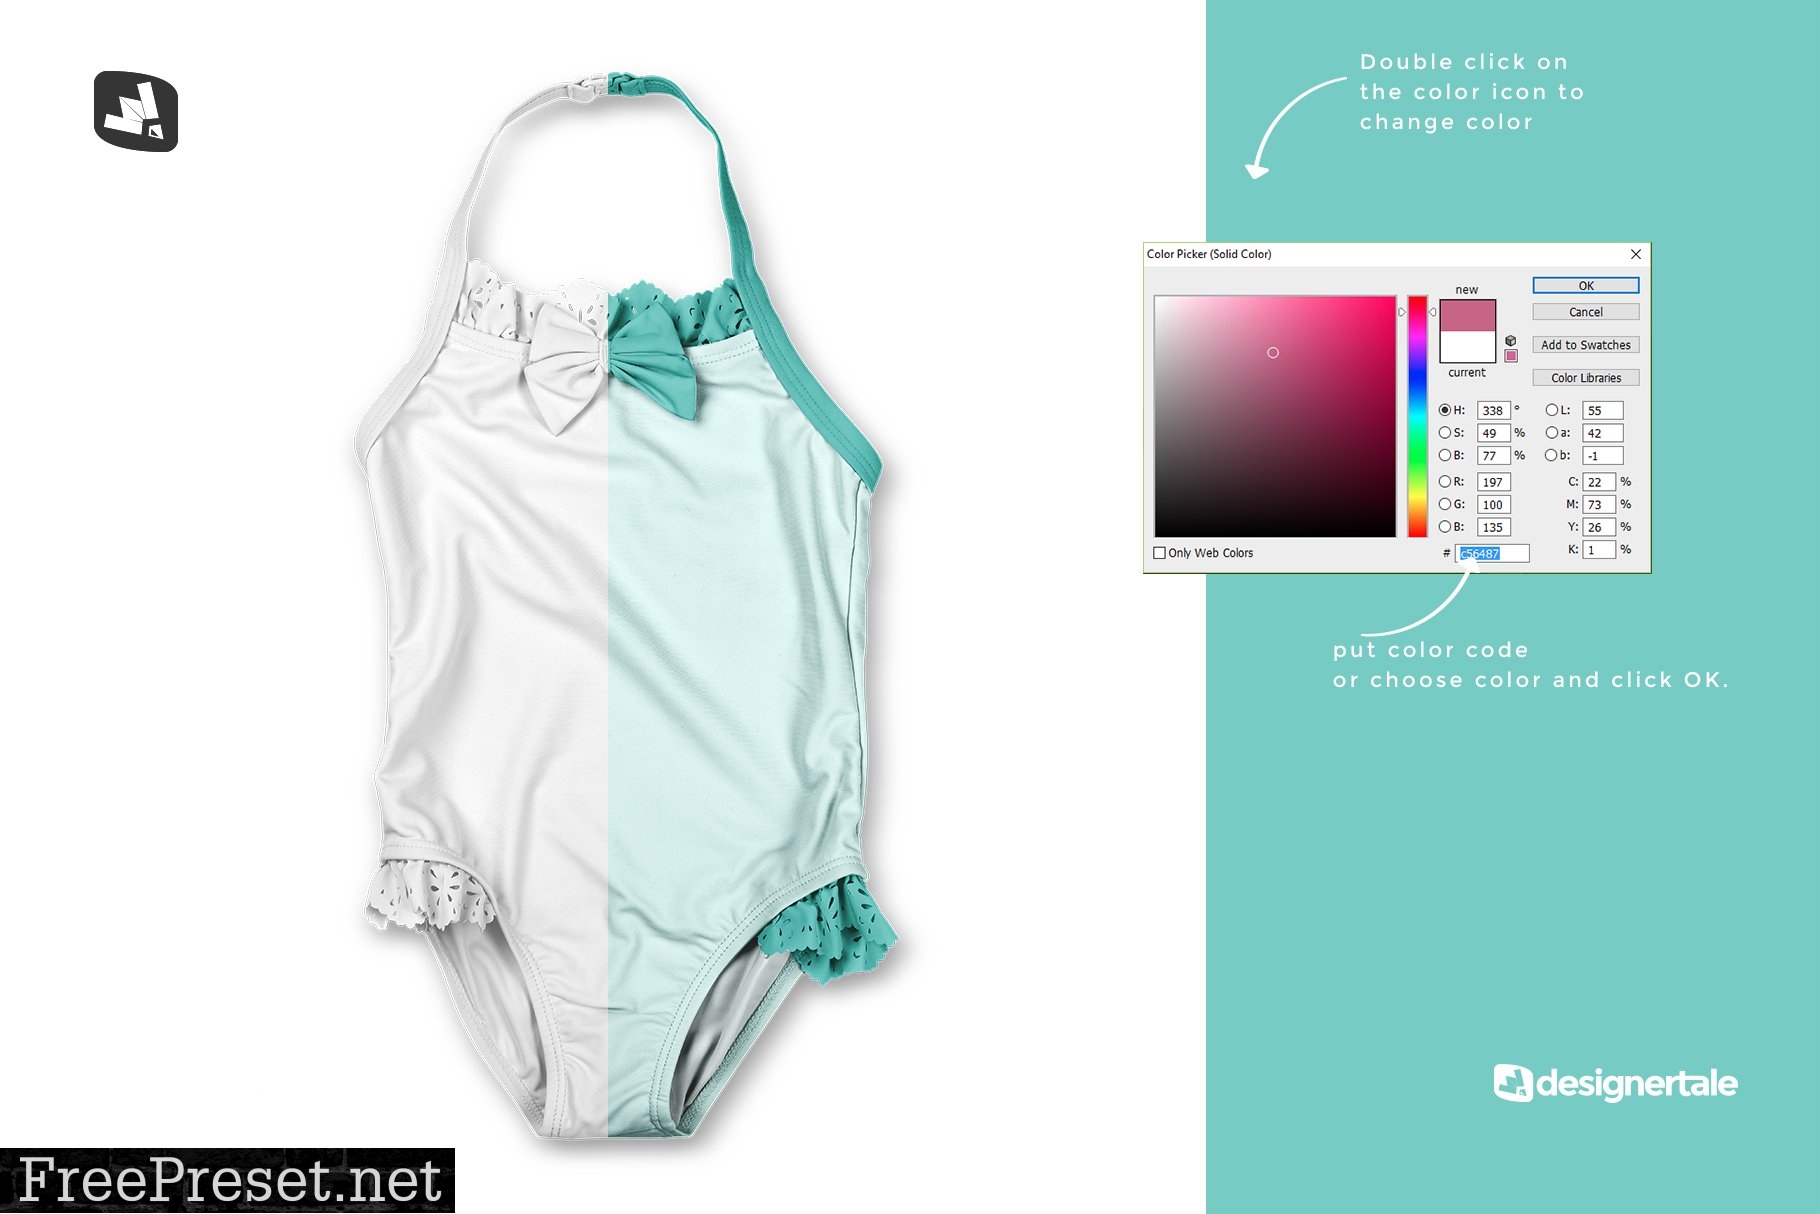 Backless Baby Swimsuit Mockup 5357952